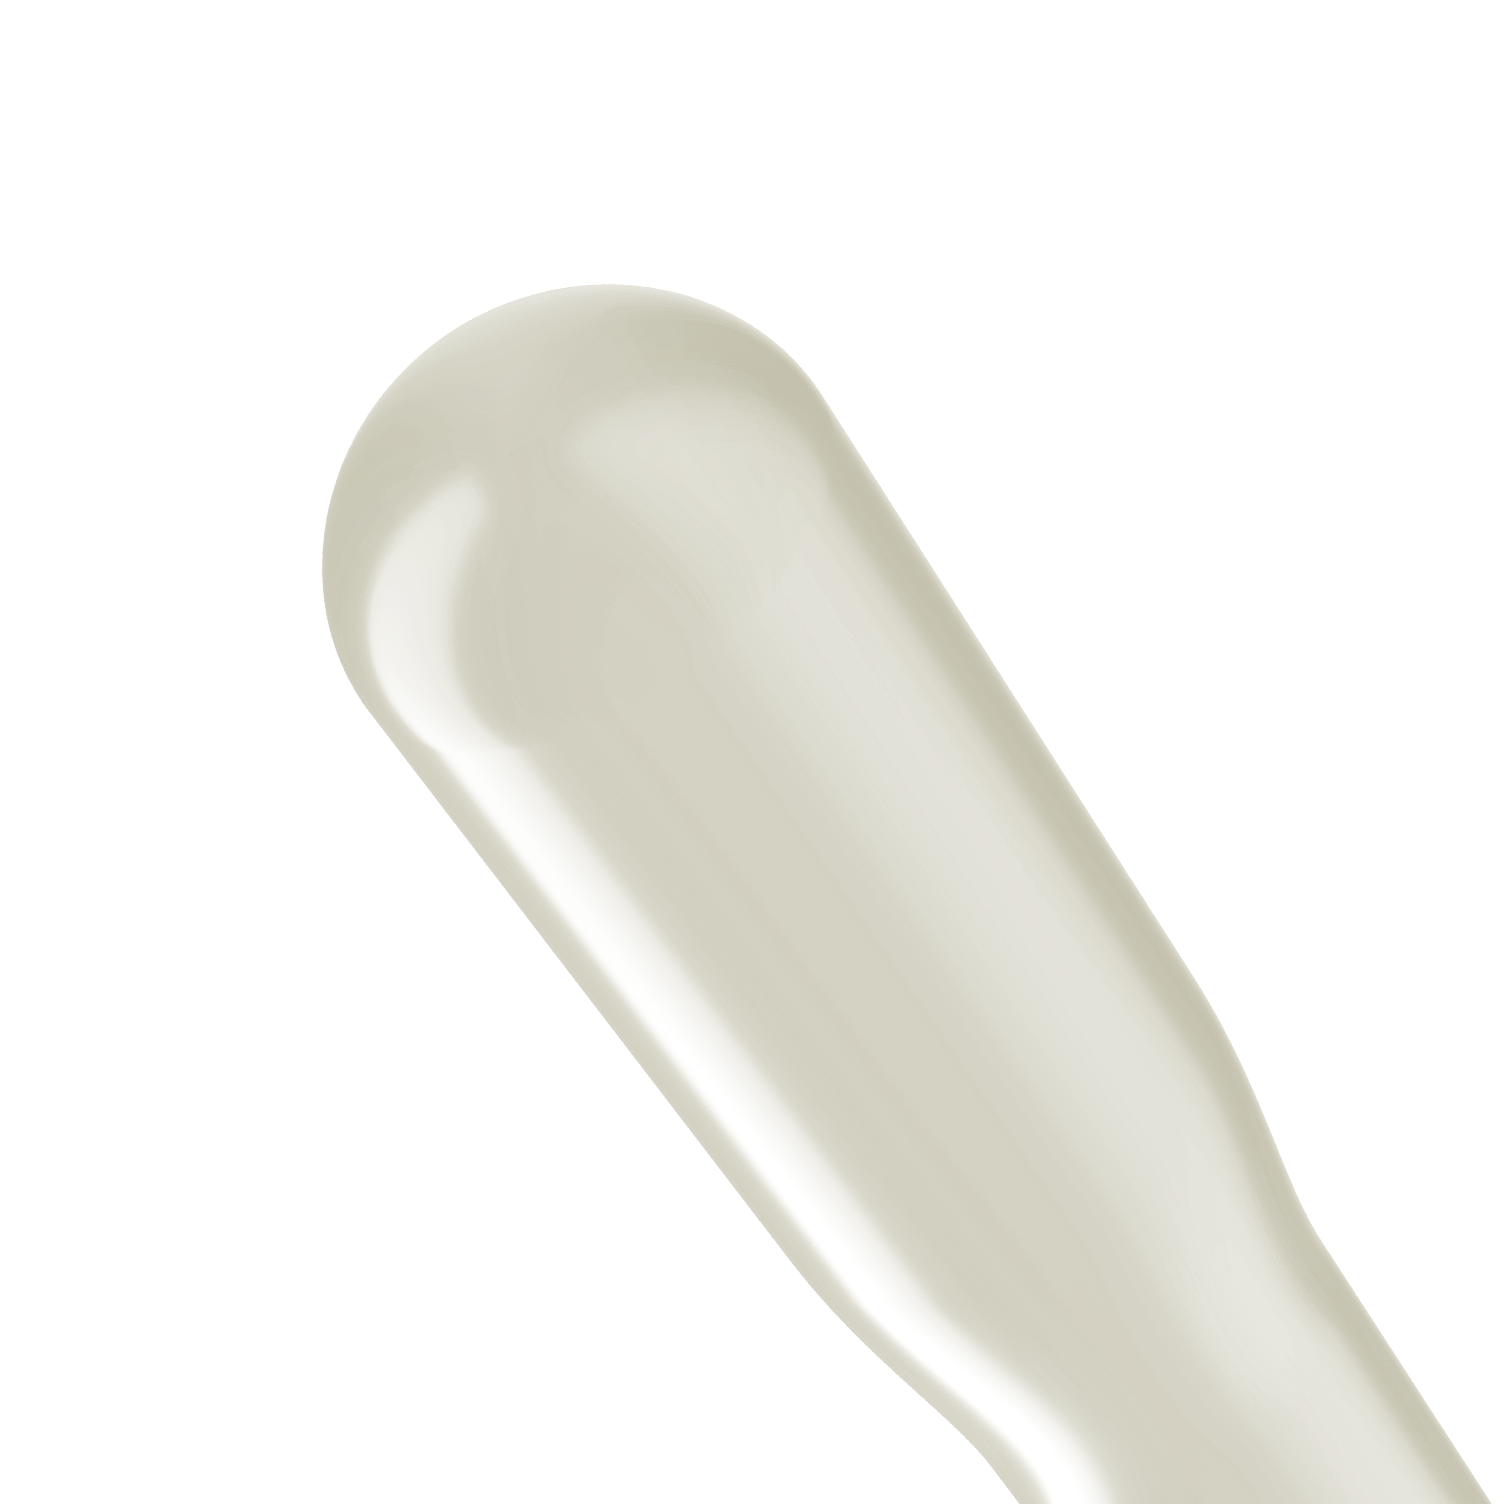 Illustrated image of inflated tip of the Trojan Ultra Fit Bare Feel Premium Lubricated Latex Condom